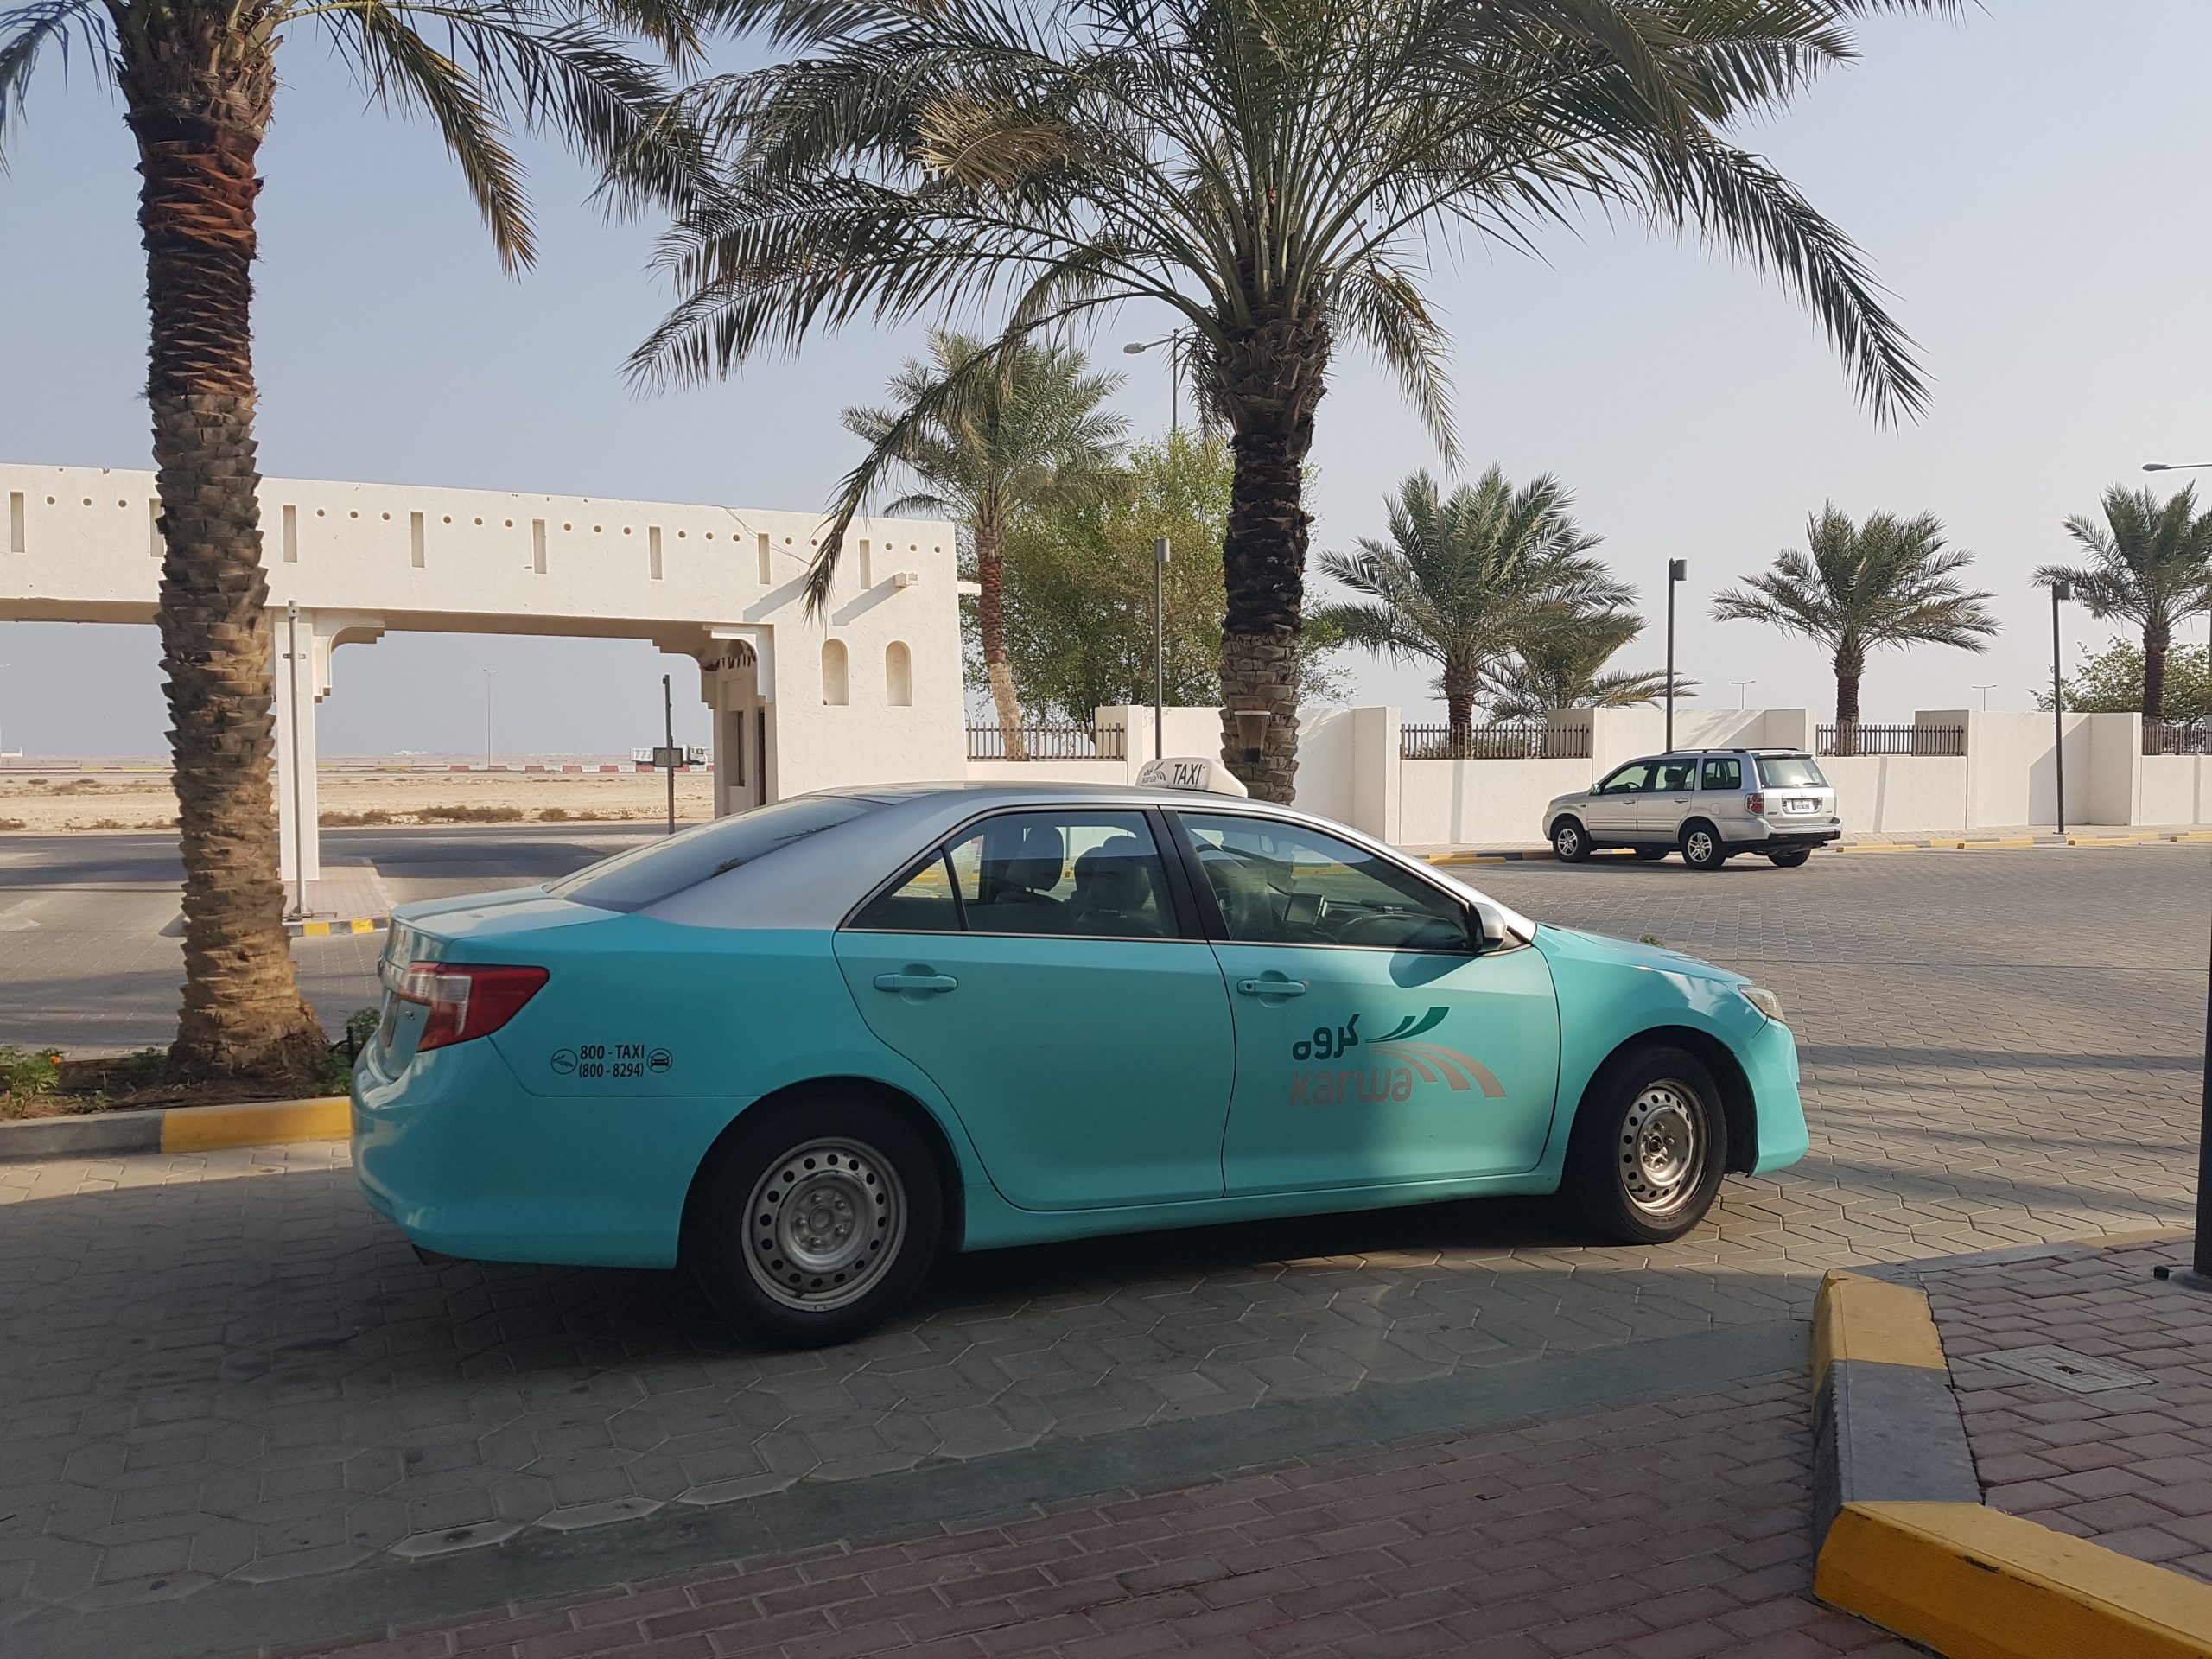 Mowasalat to activate Apple Pay and Google Pay services in Karwa taxis